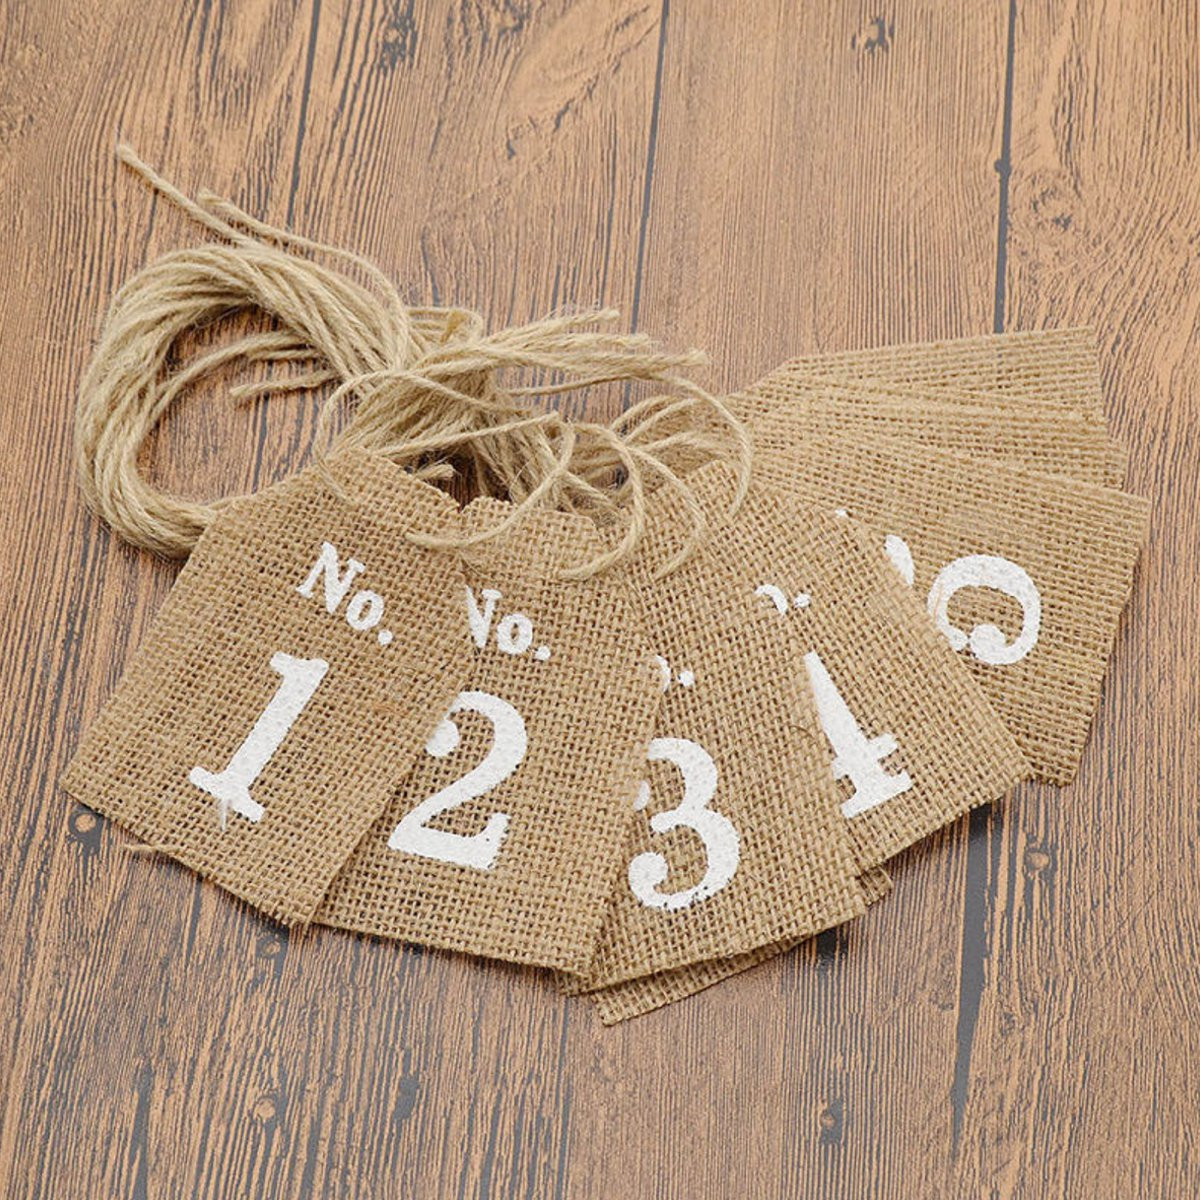 1-10-Hessian-Jute-Burlap-Banner-Table-Signs-Wedding-Table-Numbers-Decoration-1119382